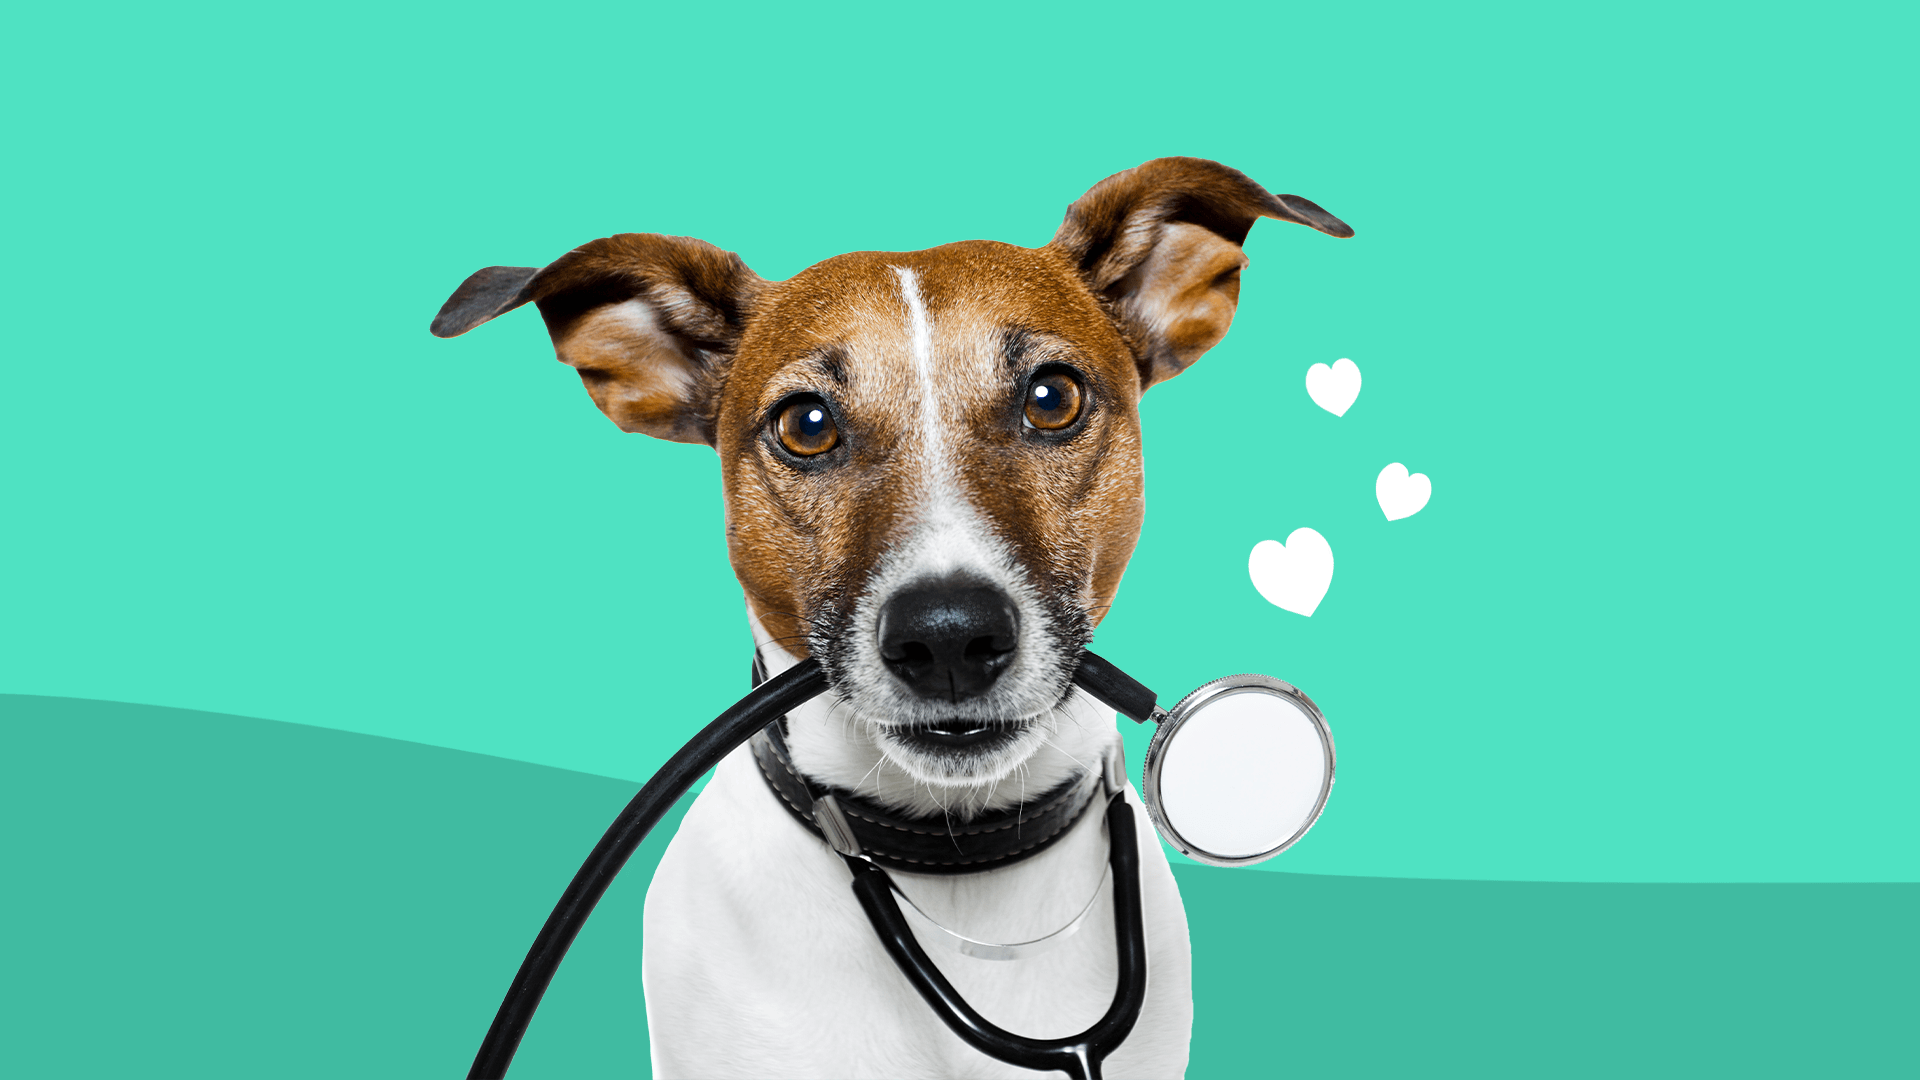 How do you treat a dog with high blood pressure?